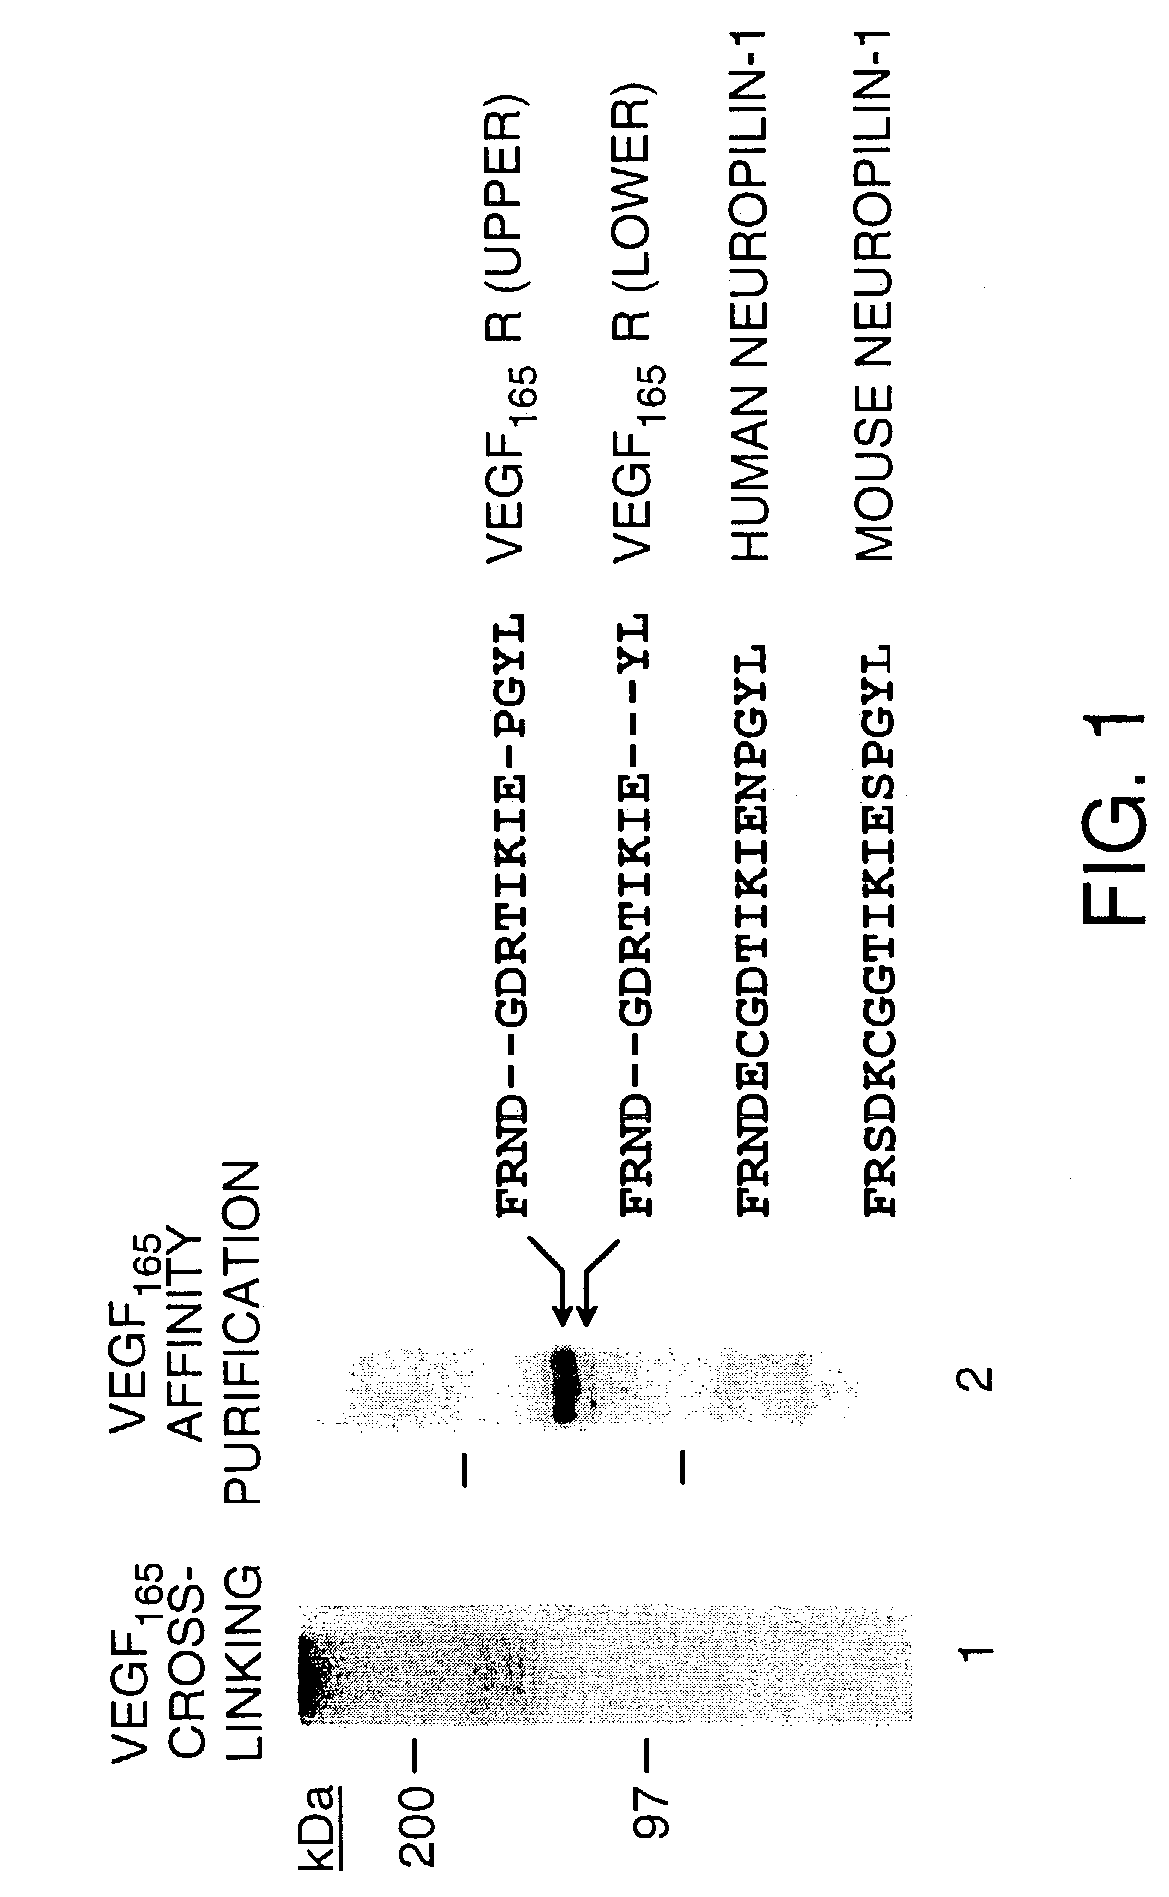 Soluble inhibitors of vascular endothelial growth factor and use thereof